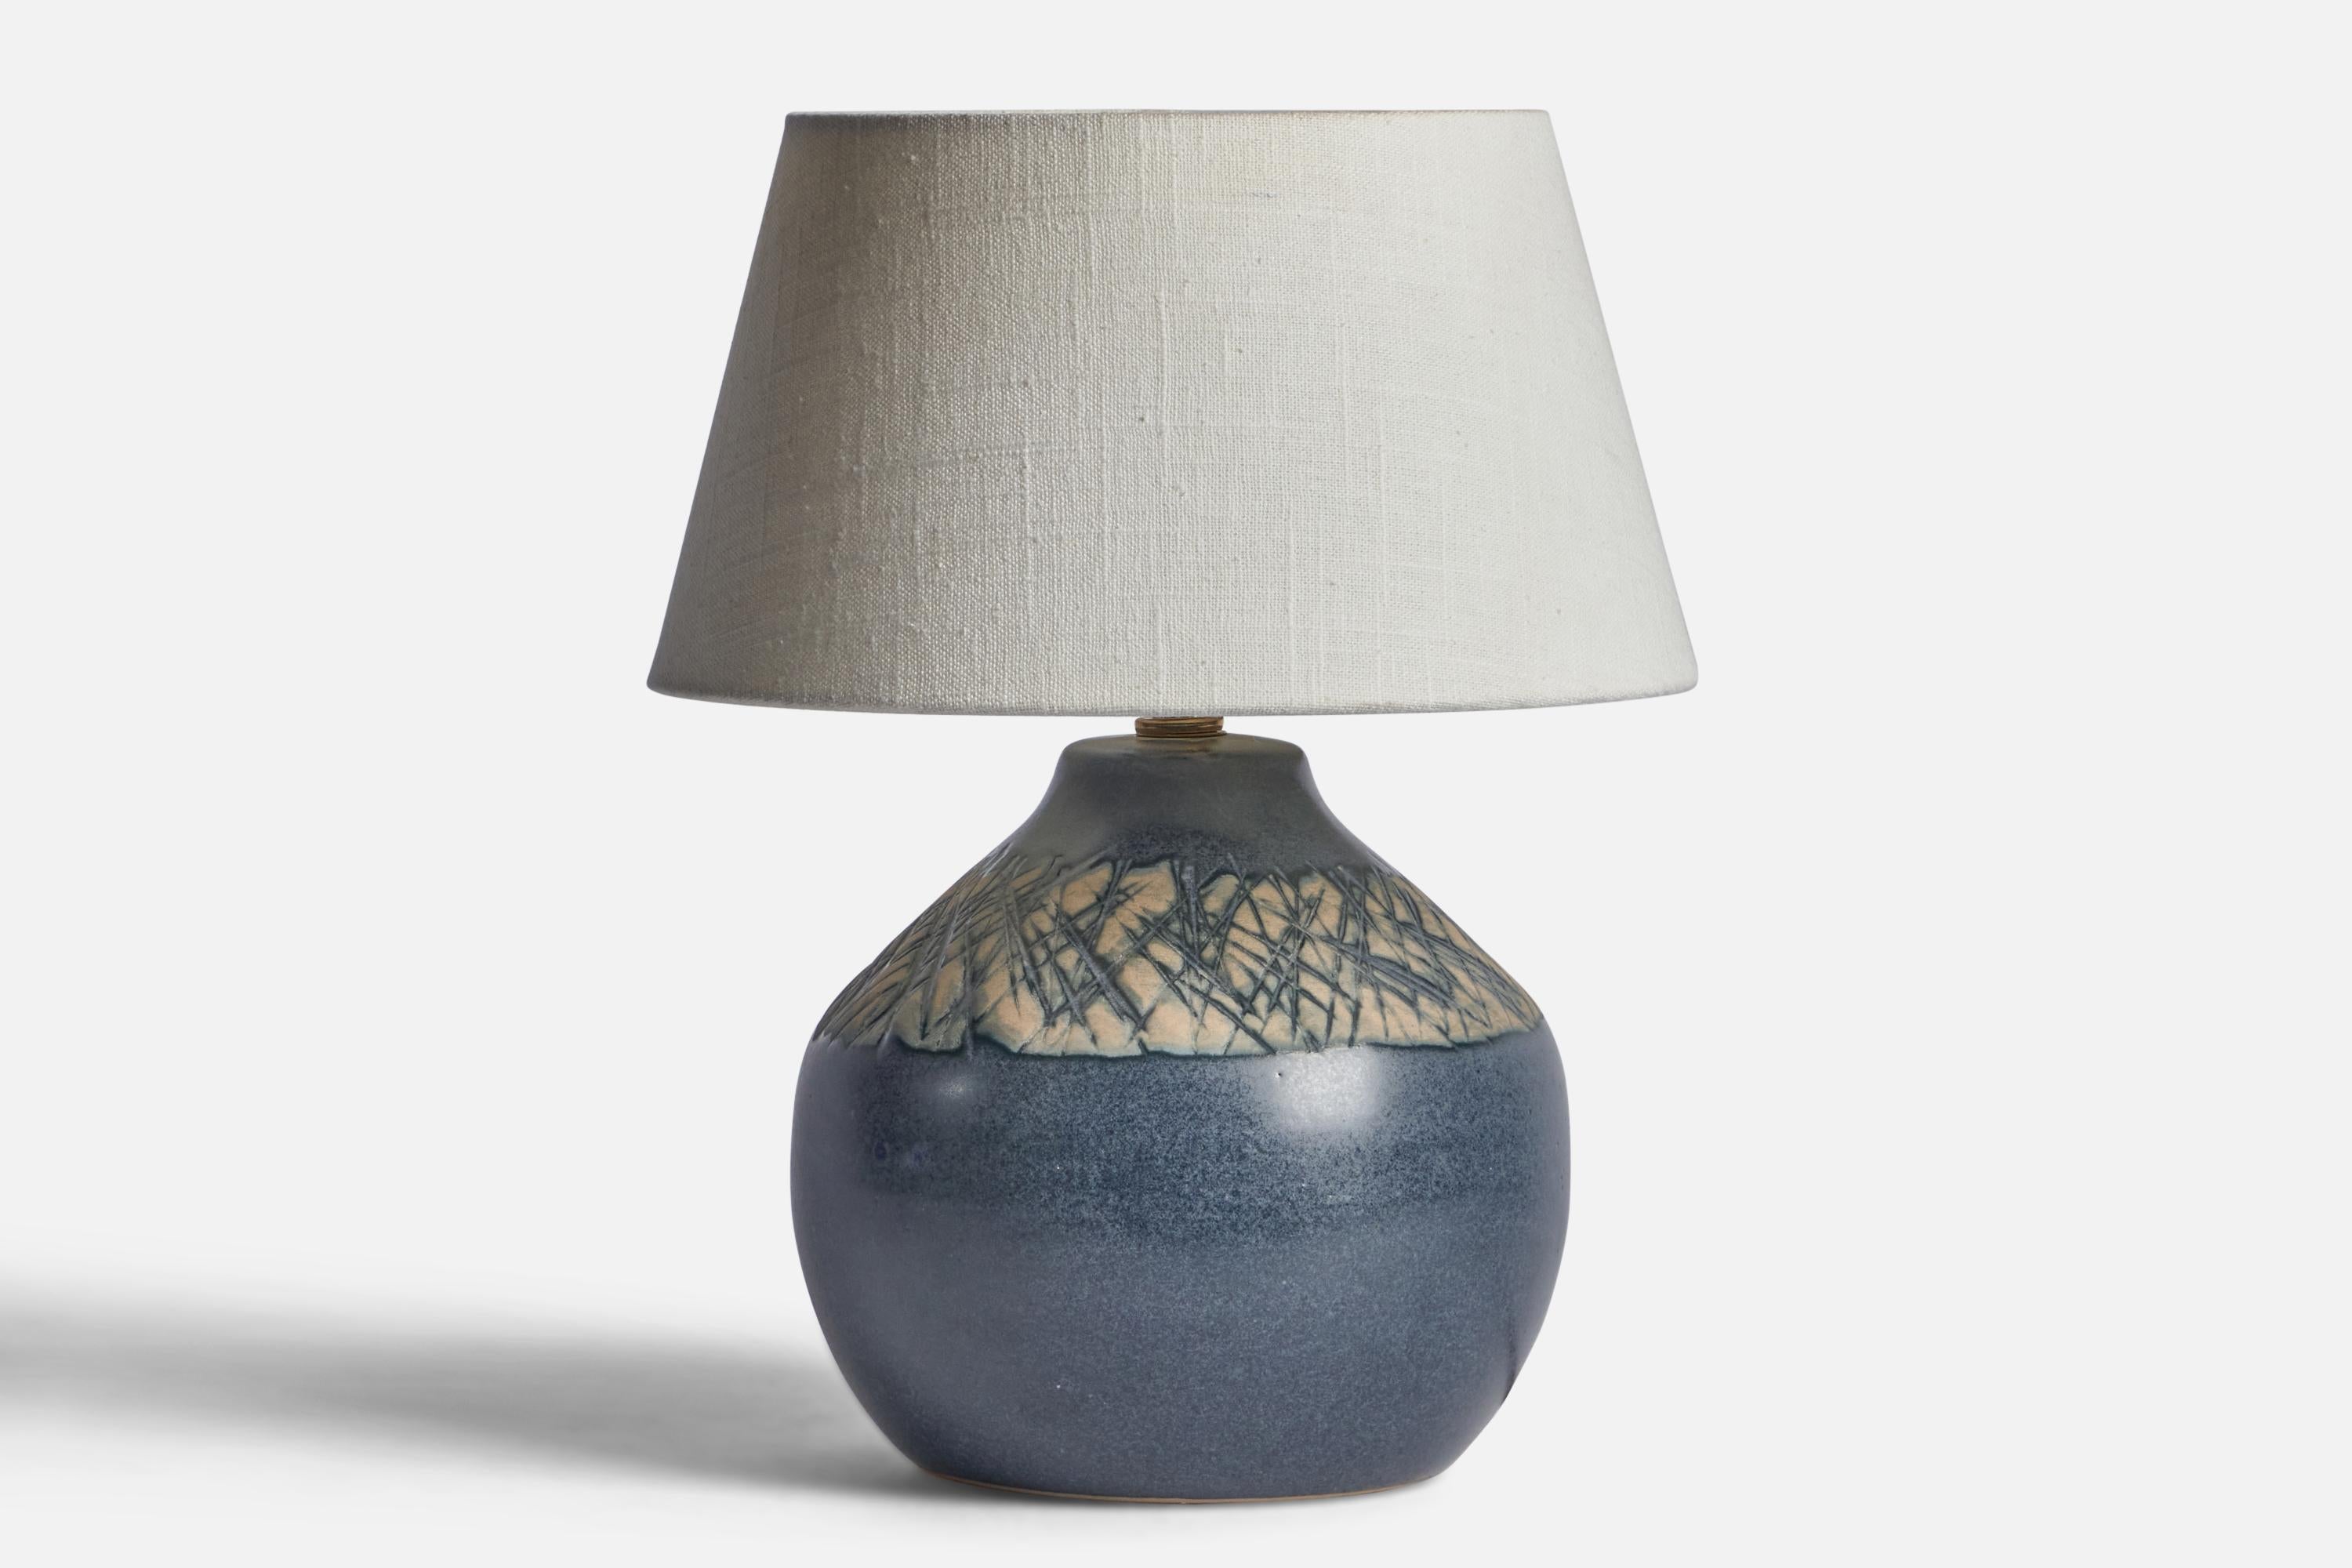 A beige and blue-glazed ceramic table lamp designed by Jane & Gordon Martz and produced by Marshall Studios, USA, 1960s.

Dimensions of Lamp (inches): 10” H x 7.4” Diameter
Dimensions of Shade (inches): 7” Top Diameter x 10” Bottom Diameter x 5.5” H